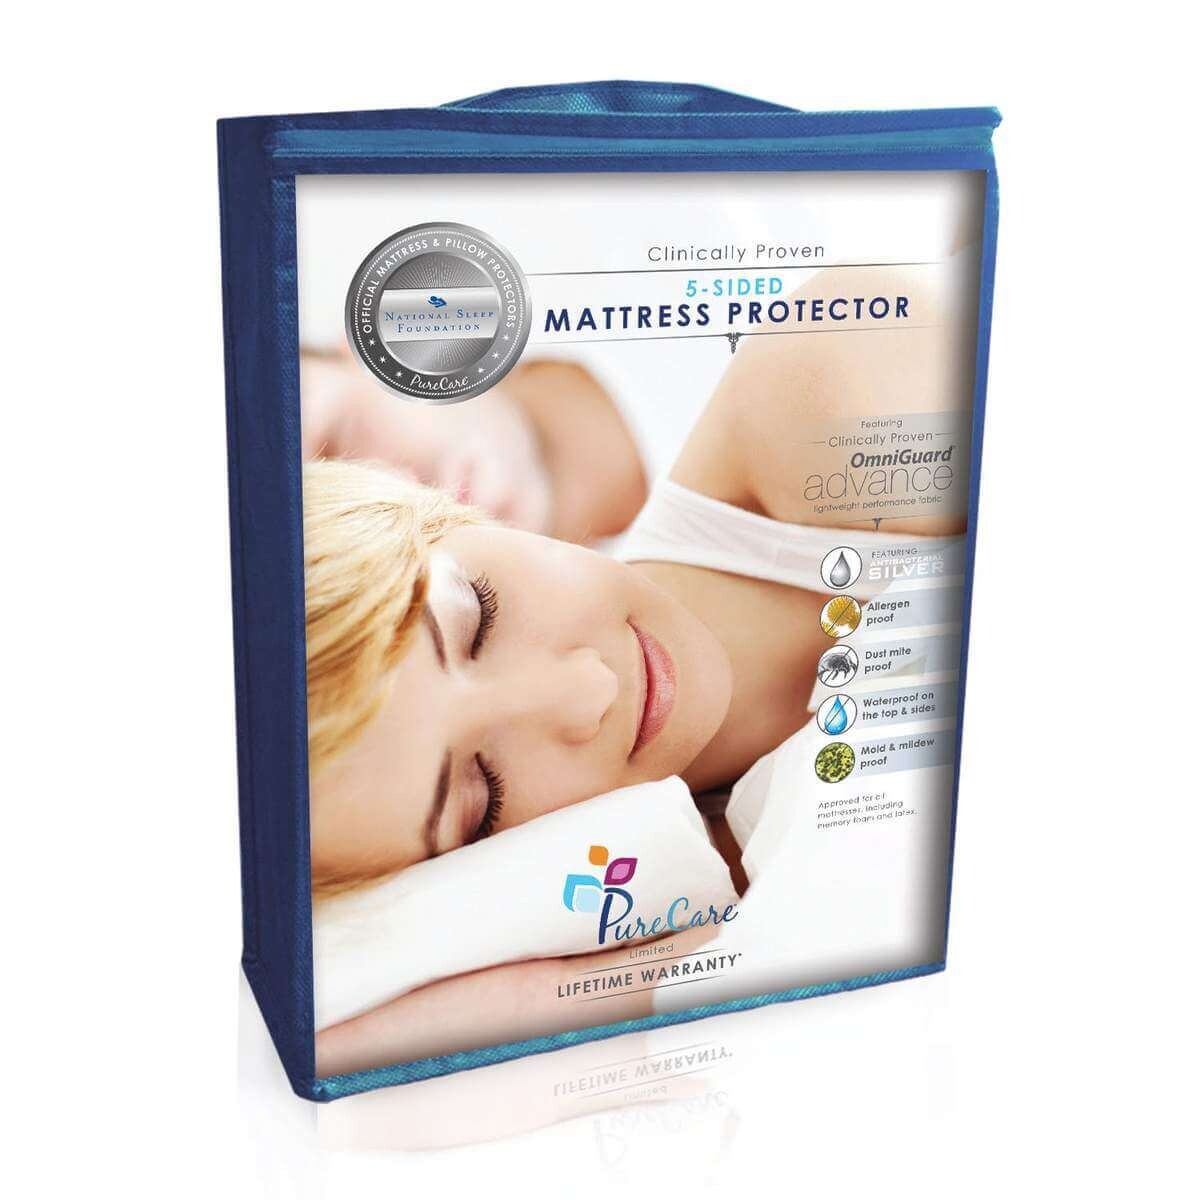 PureCare 5-sided Mattress Protector